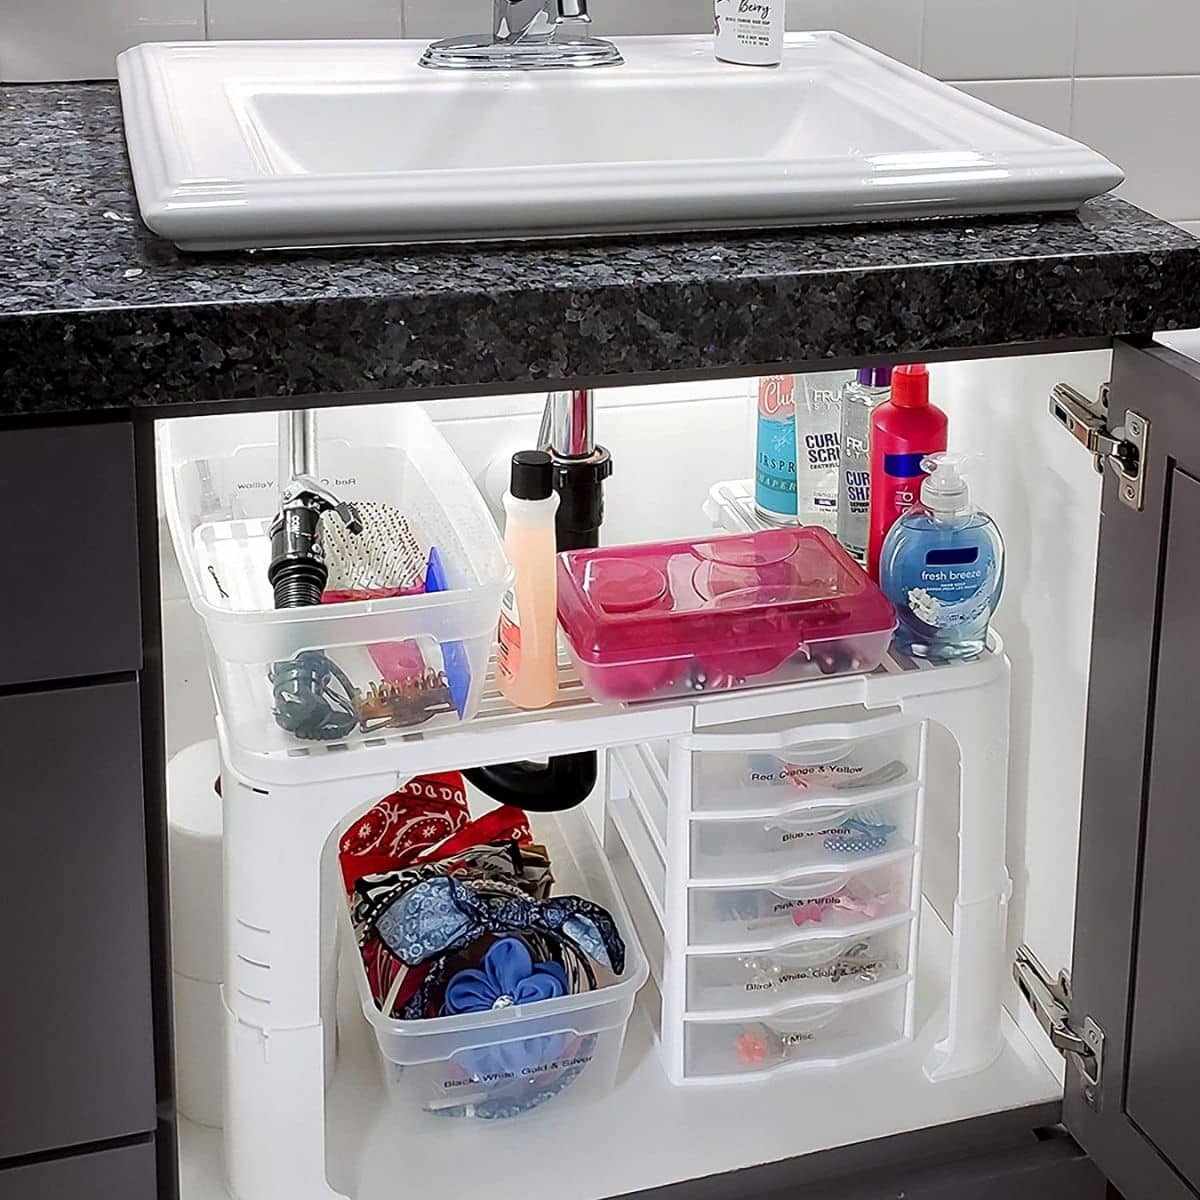 Expand from 17 to 26 inches Bathroom Cabinet JXRCW Expandable Under Sink Organizer Shelf Storage Rack with Removable Panels and Steel Pipes for Kitchen 1-Tier 